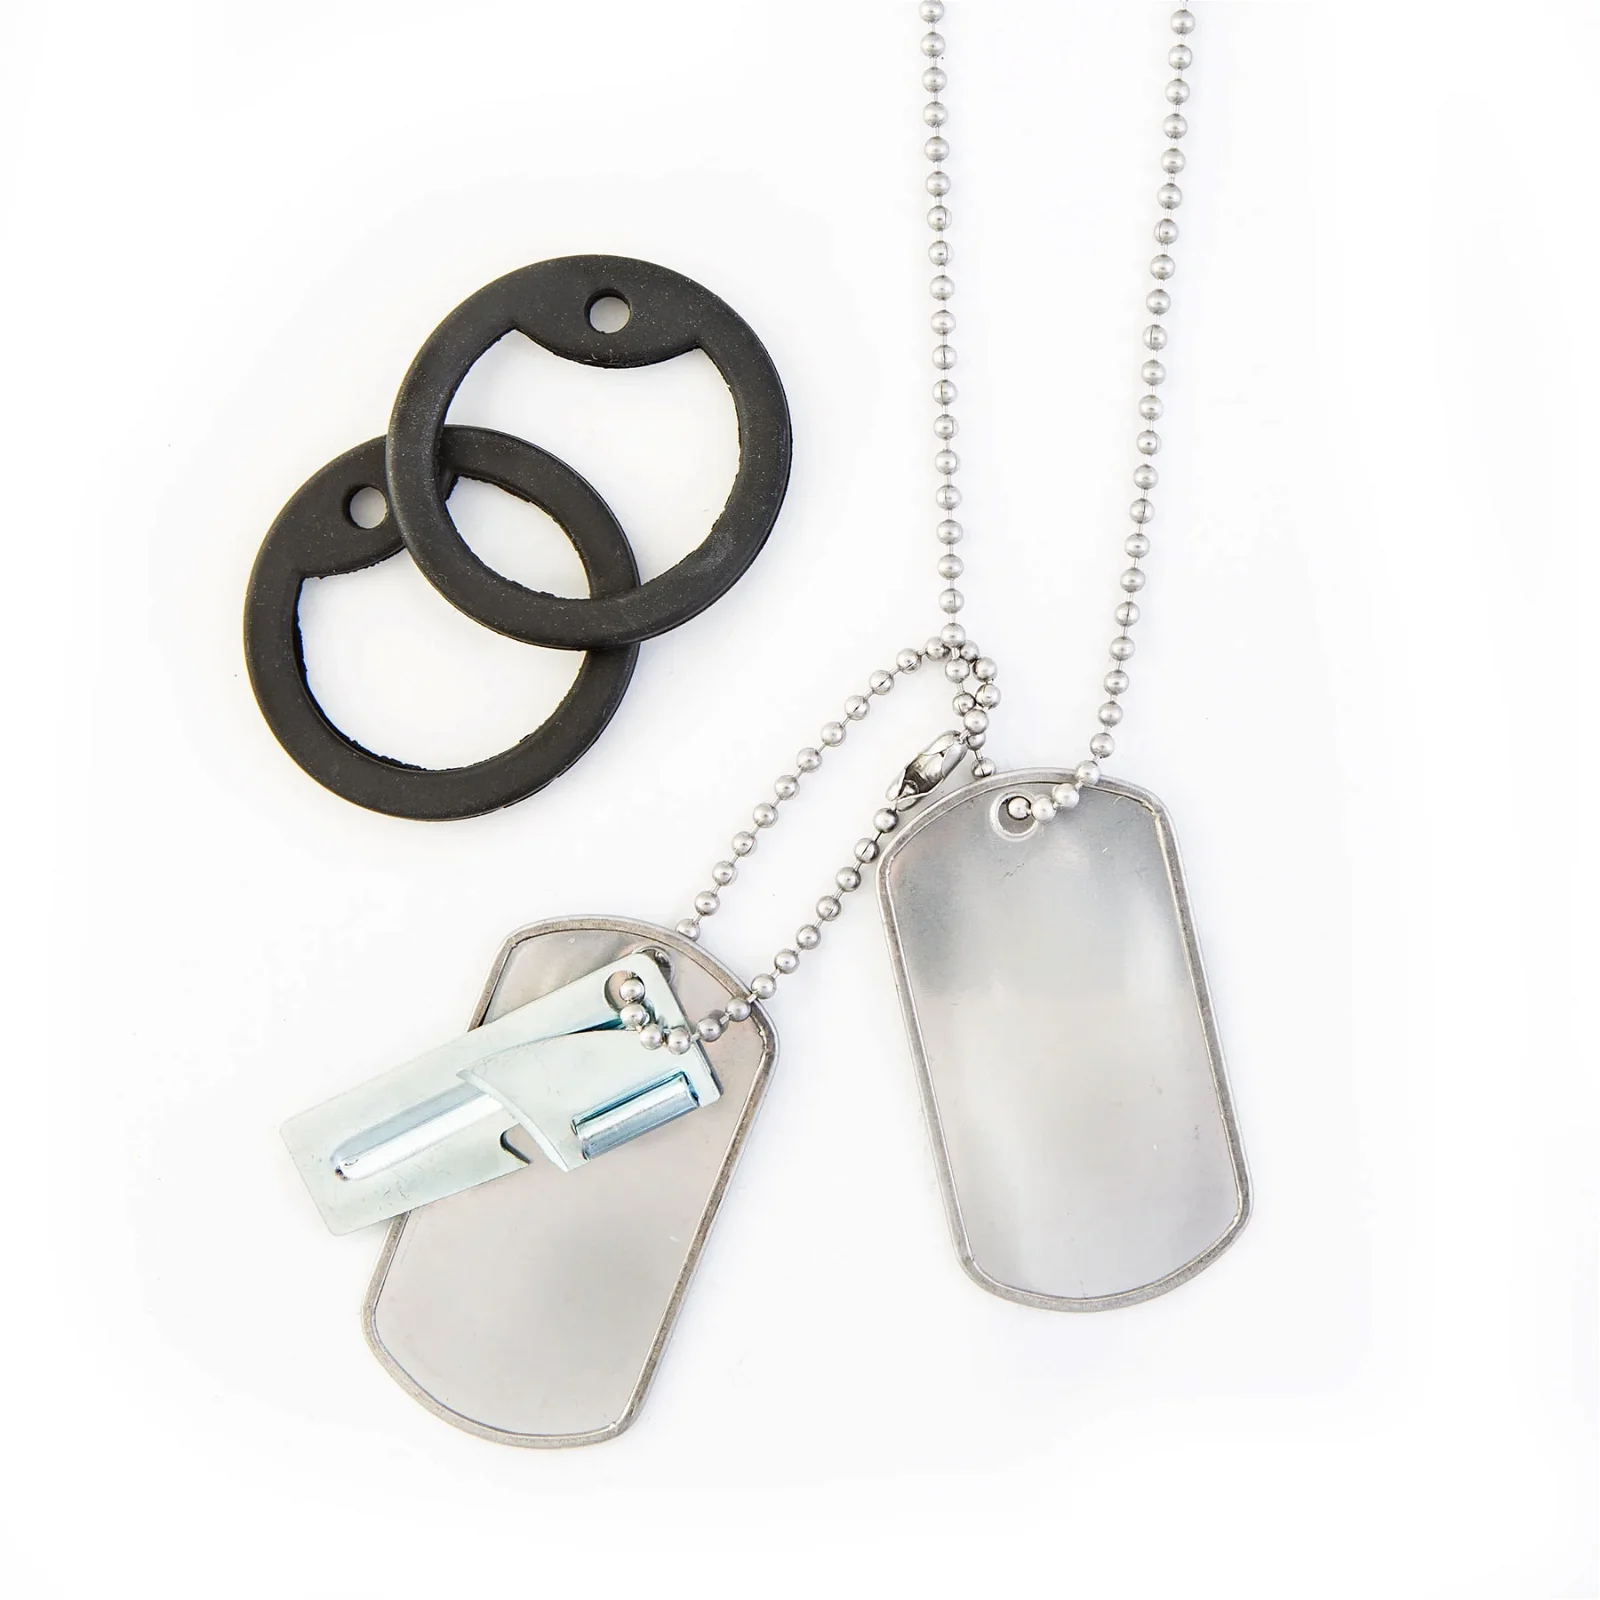 Image of Stainless Steel Dull Finish Dog Tags with FREE P38 Can Opener